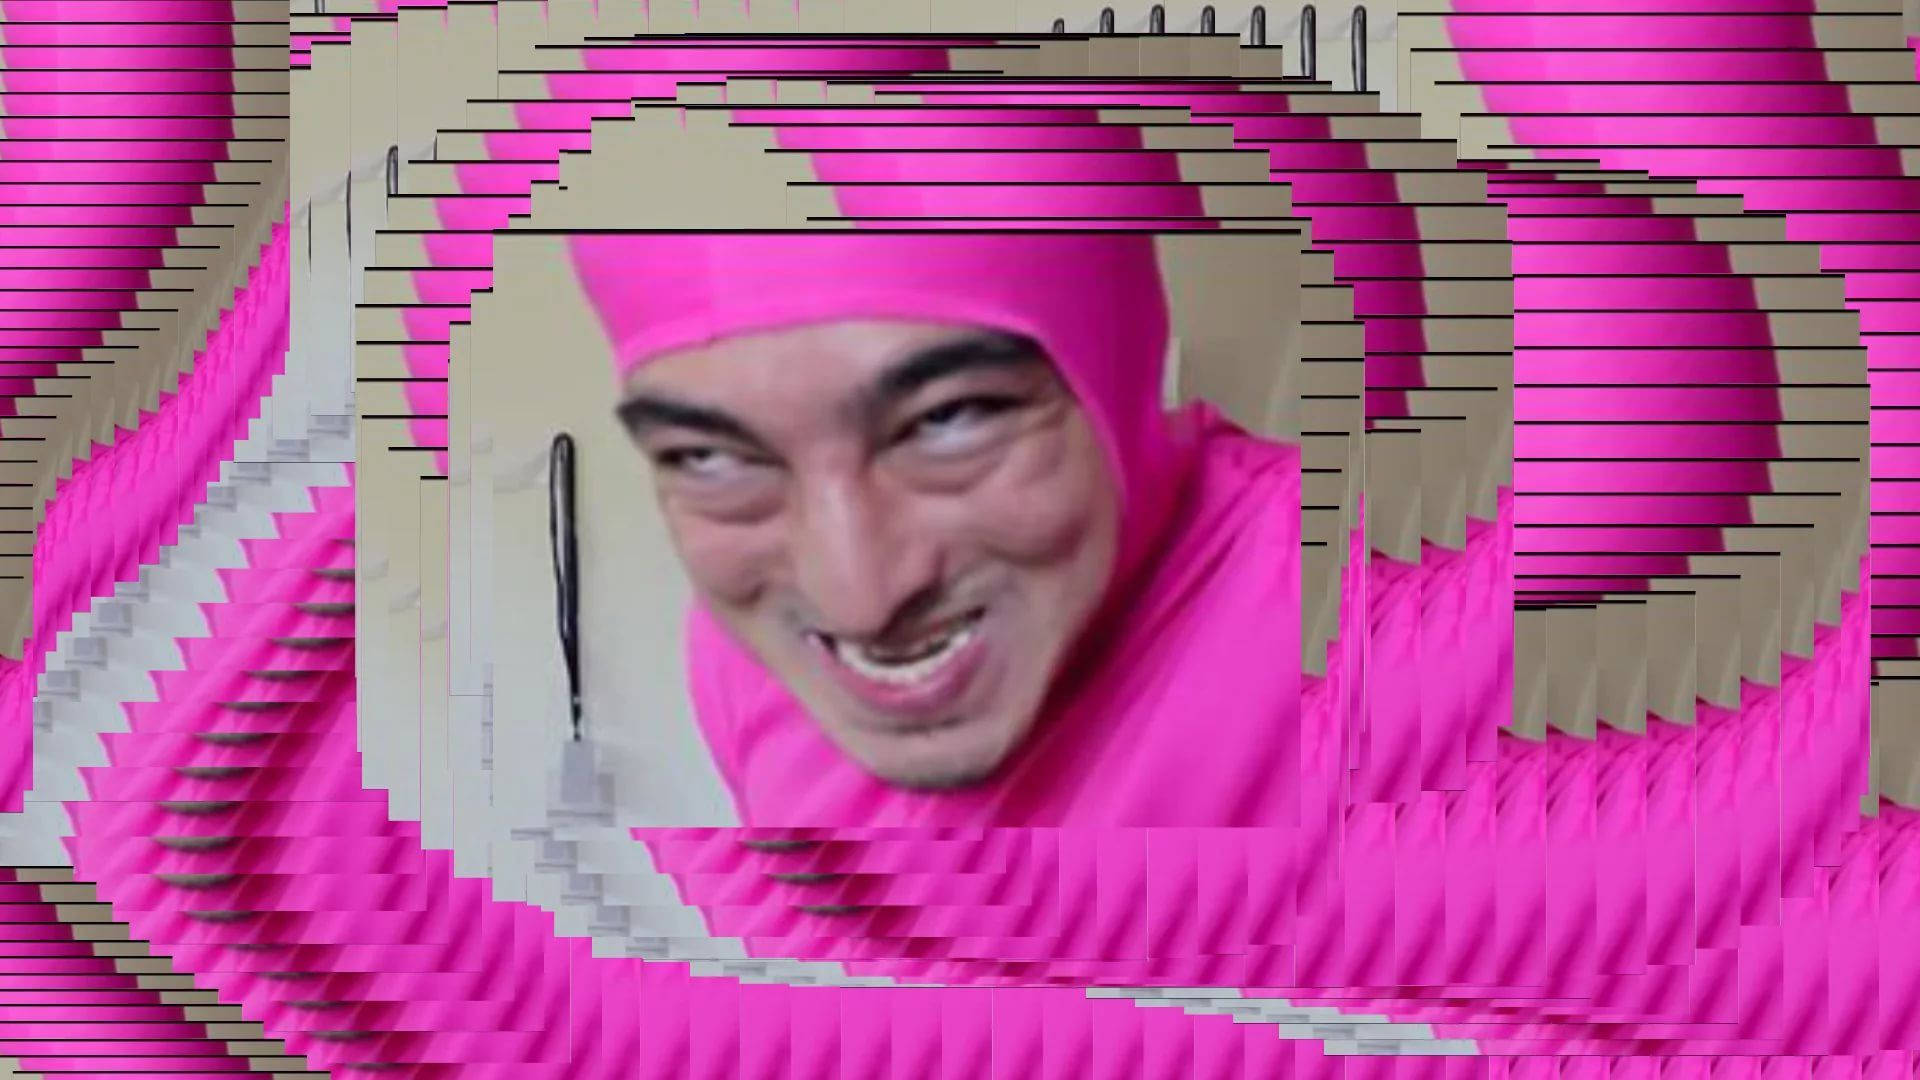 Filthy Frank In Pink Background